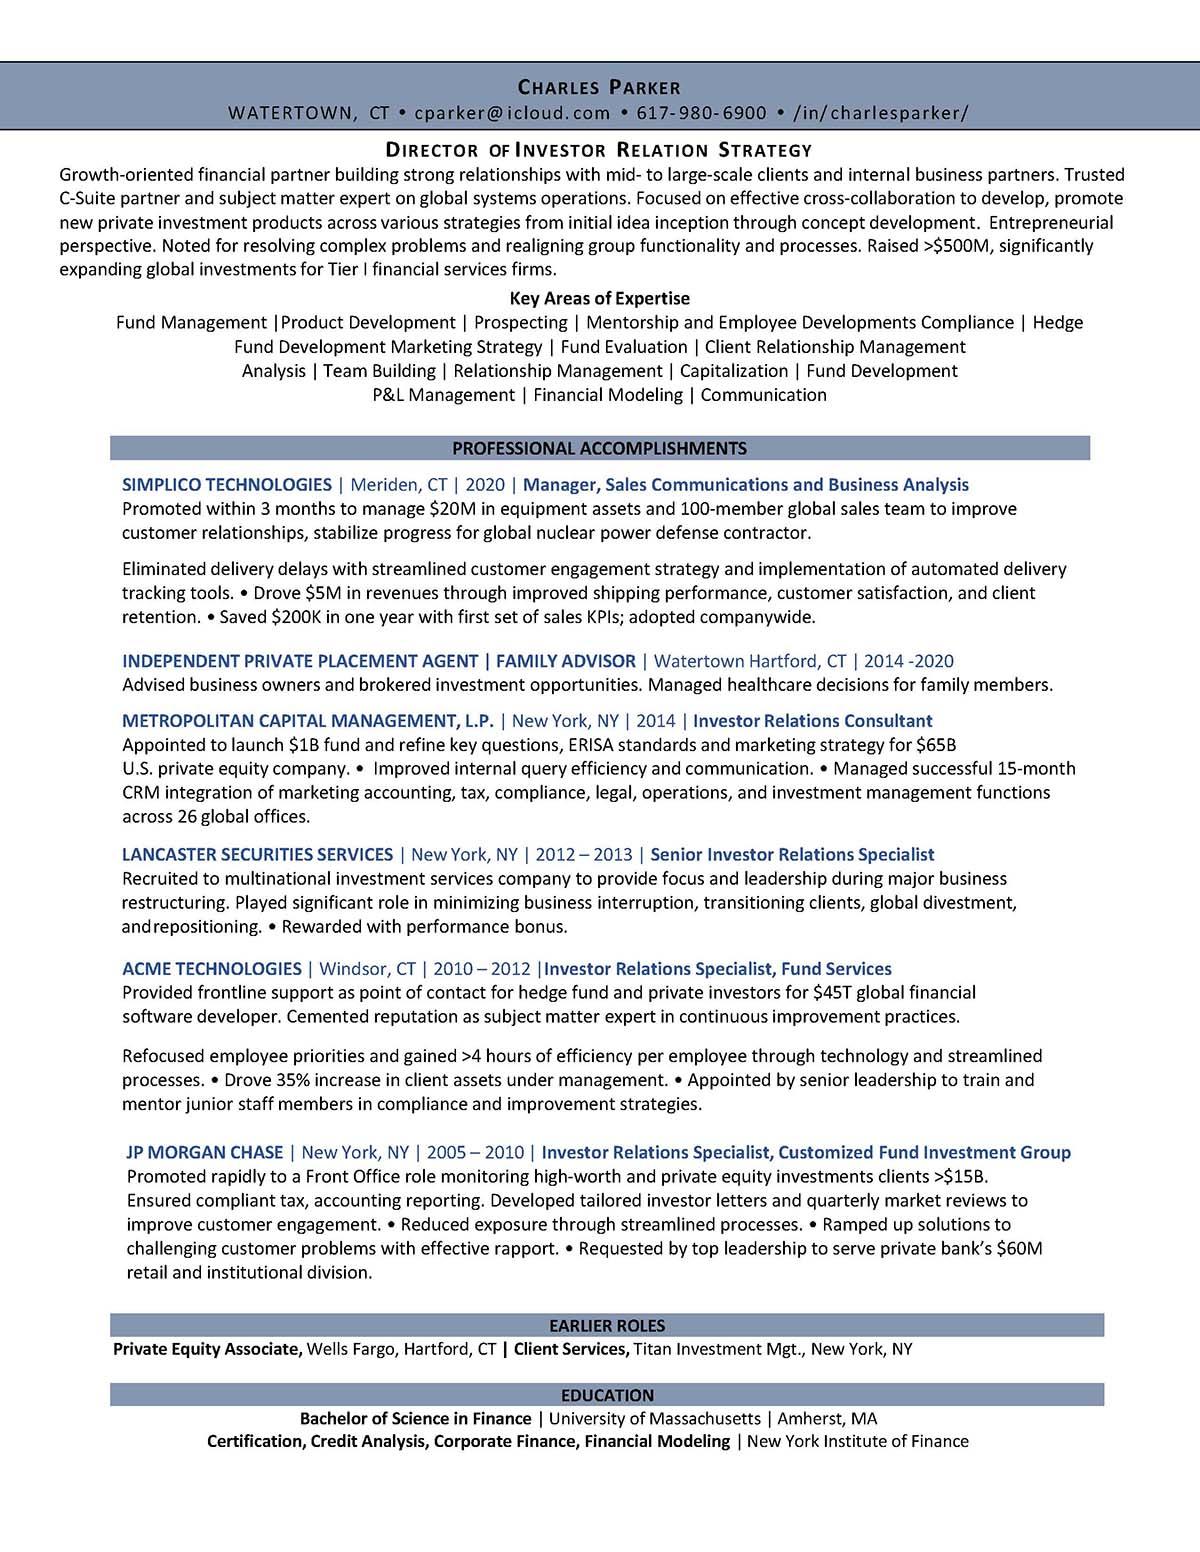 Sample resume: Investment Management, High Experience, Chronological